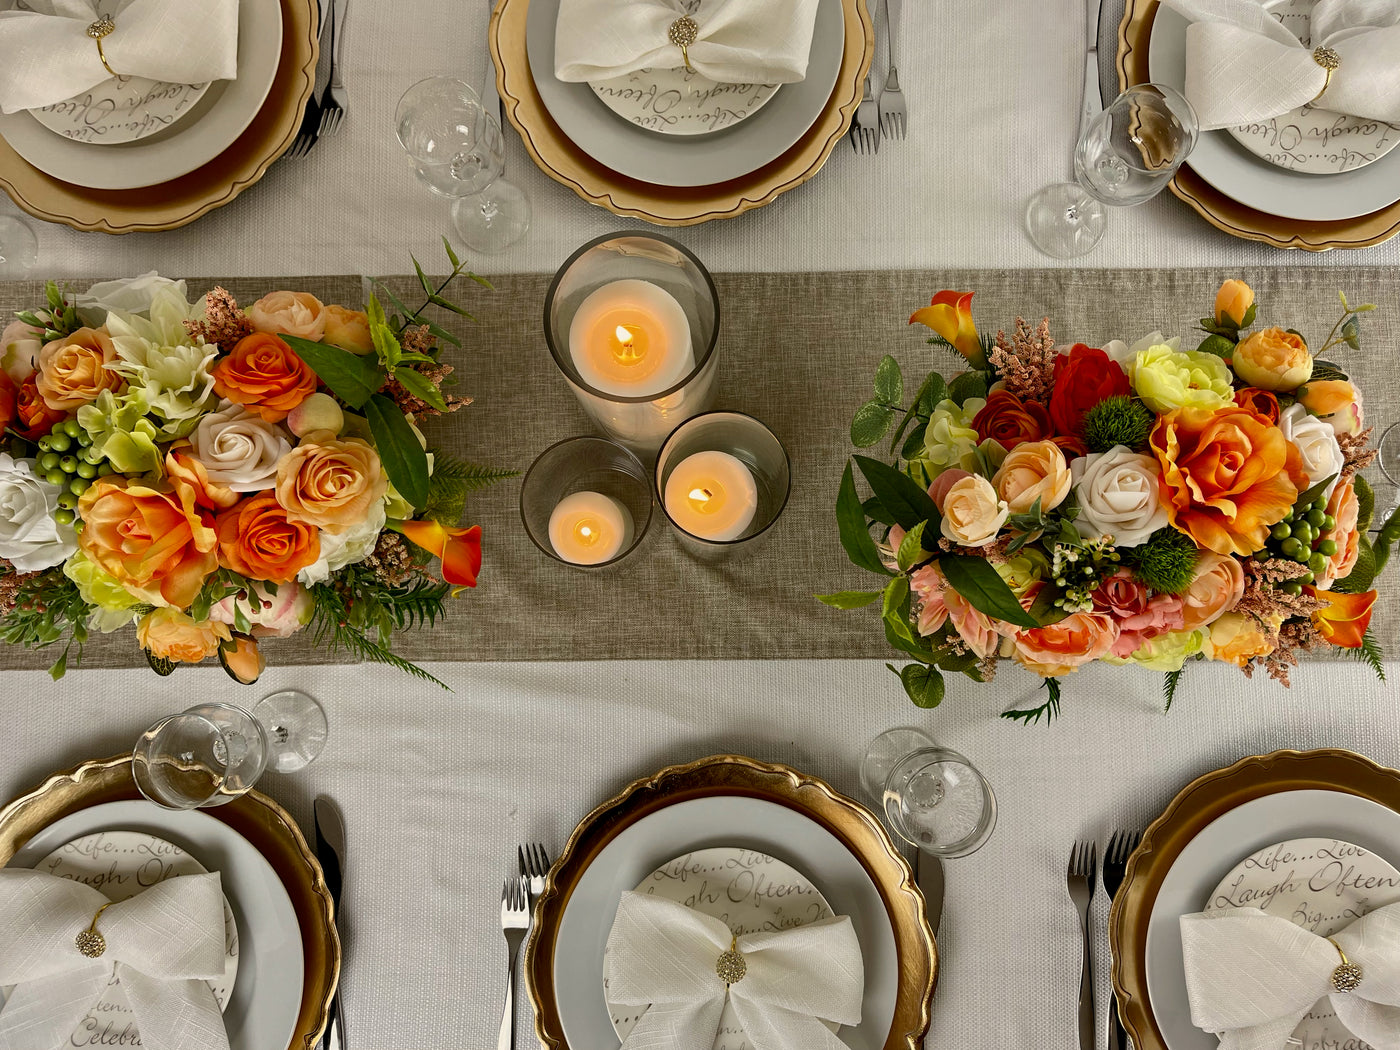  Ornate gold chargers shown on a white tablecloth with with white napkins and gold napkin rings